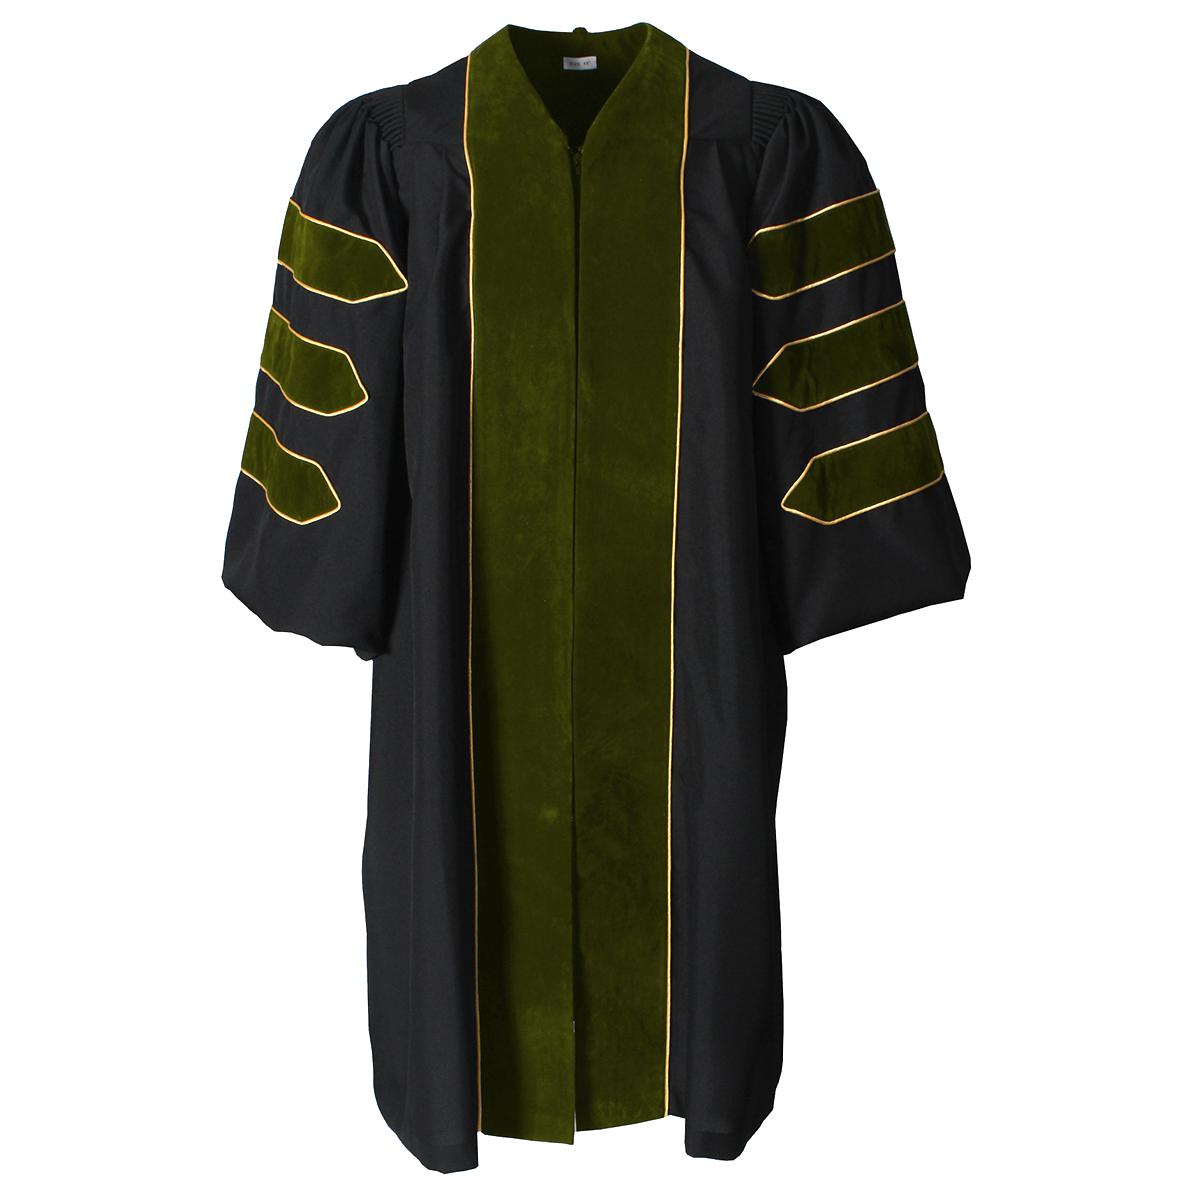 Deluxe Sage Olive Green Doctoral Gown with Gold Piping